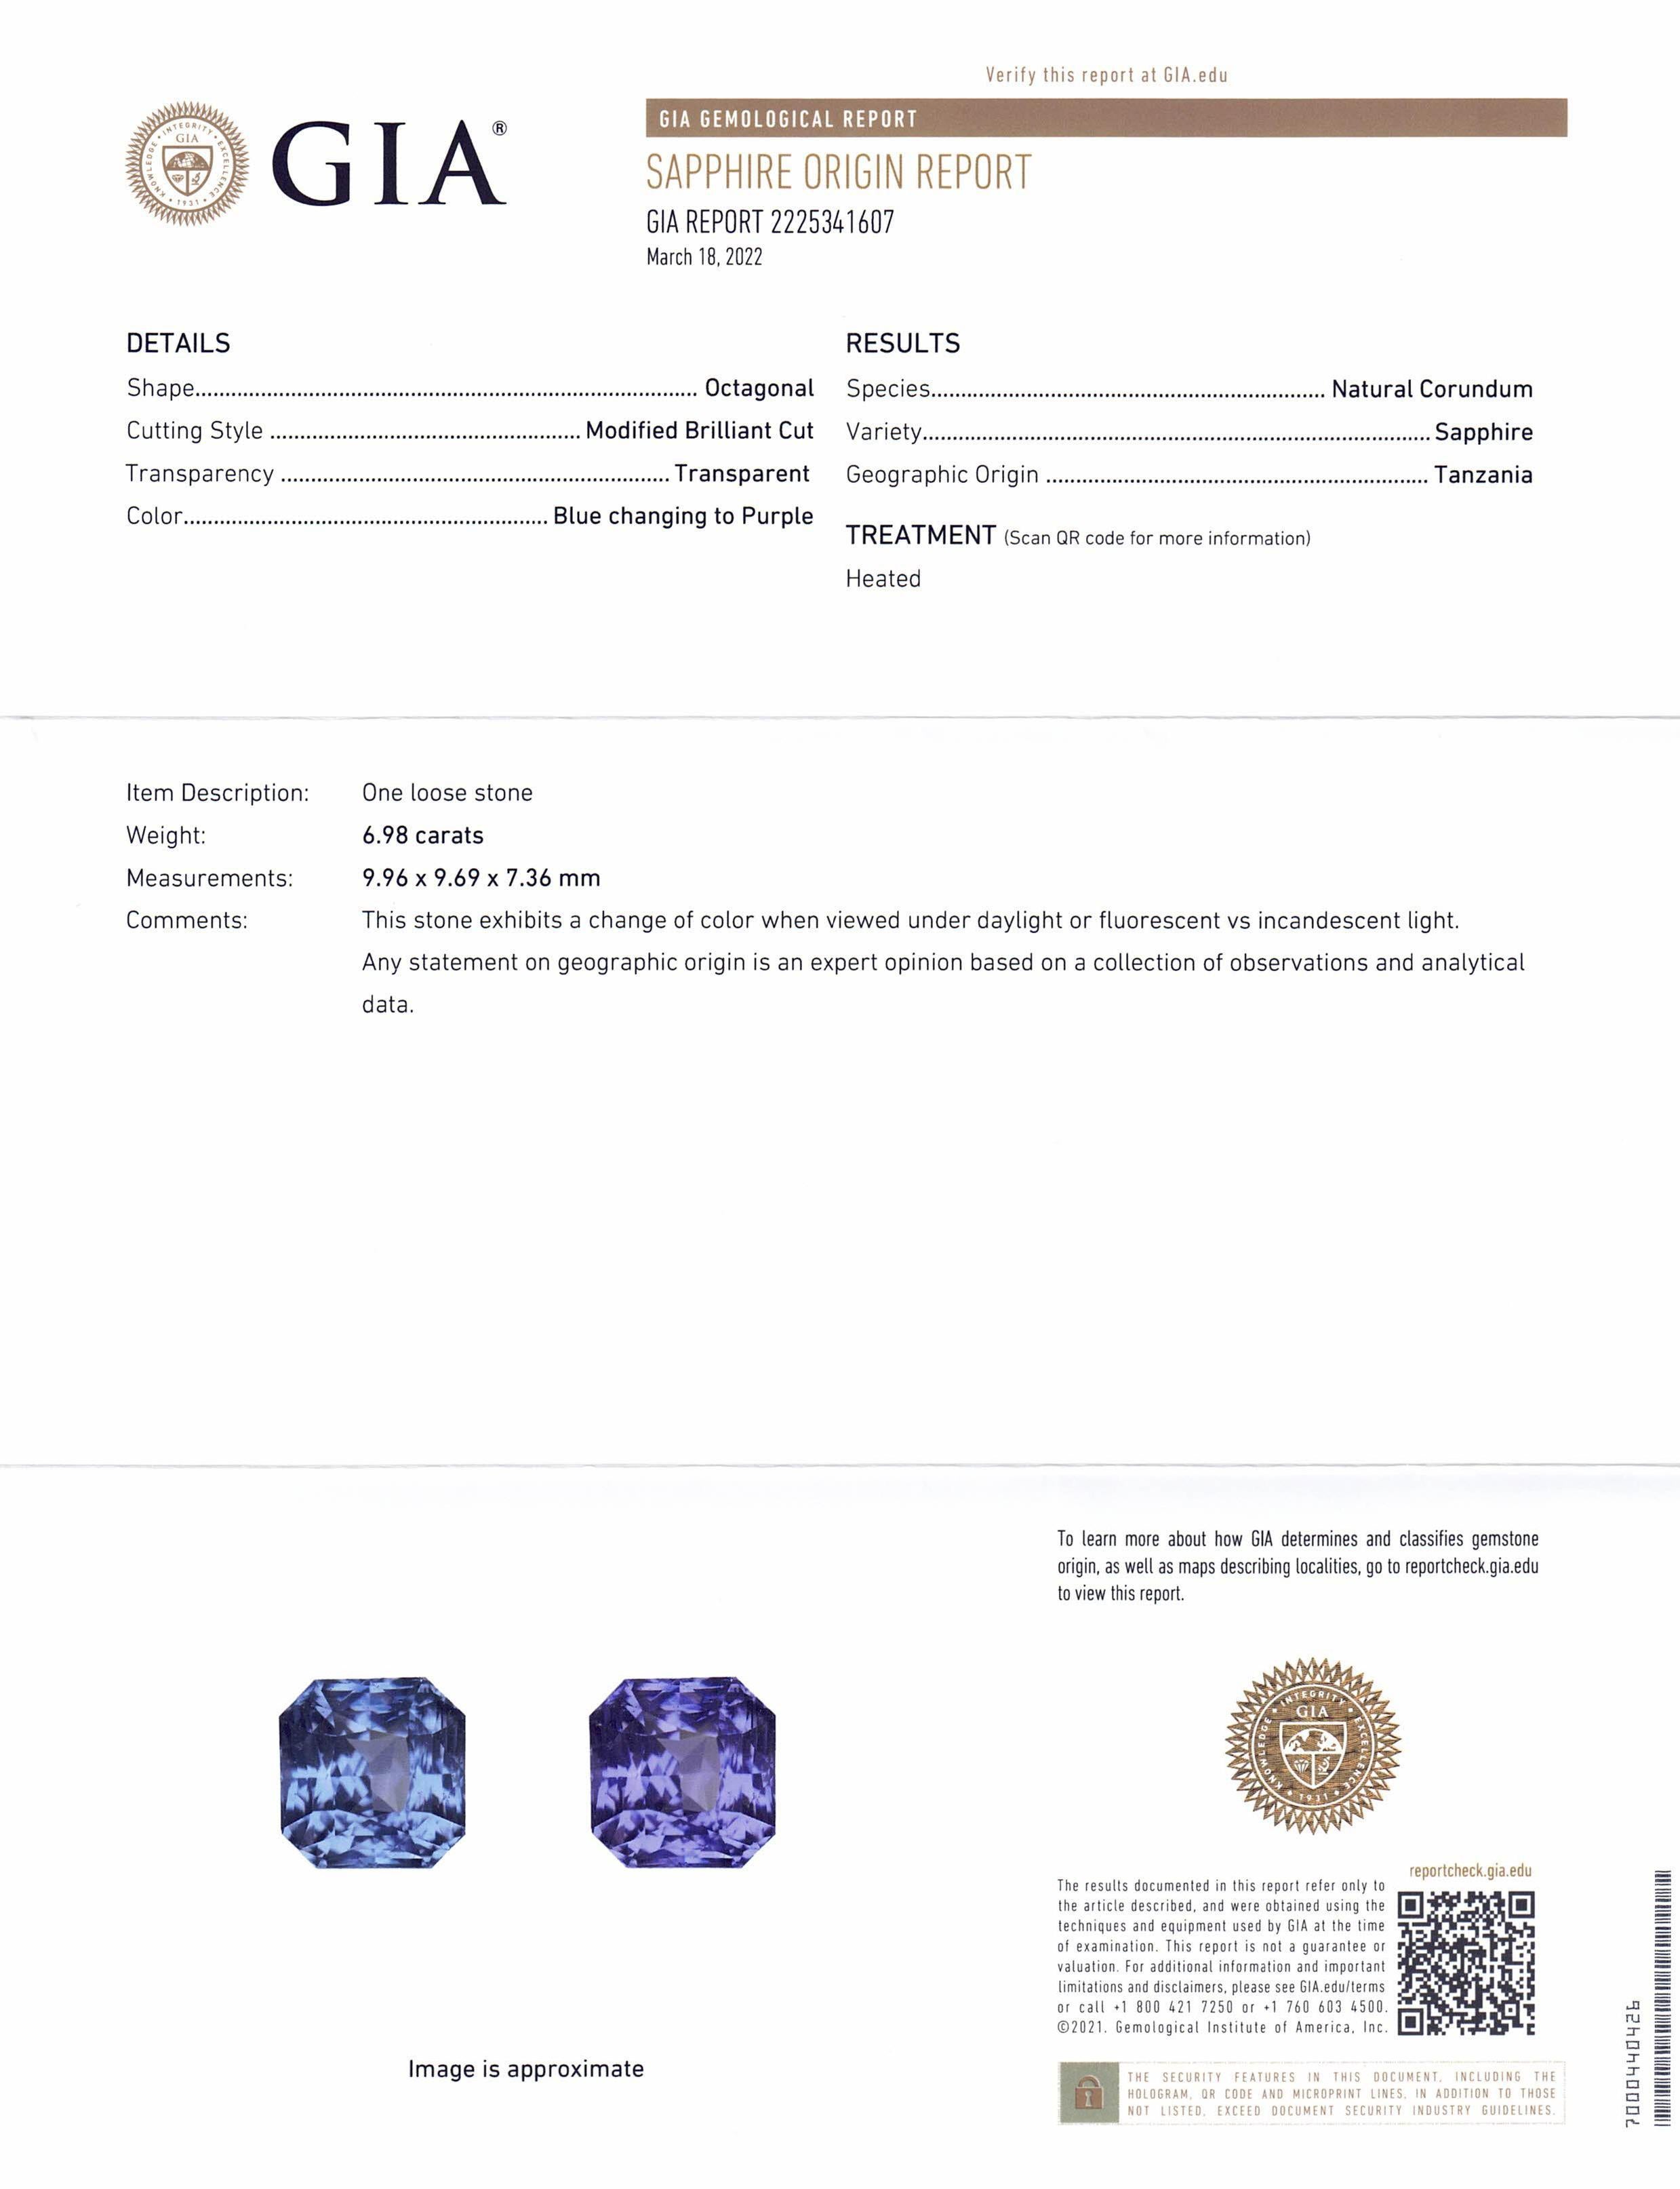 The GIA report reads as follows:

GIA Report Number: 2225341607
Shape: Octagonal
Cutting Style: Modified Brilliant Cut
Cutting Style: Crown:
Cutting Style: Pavilion:
Transparency: Transparent
Color: Blue changing to Purple

 

RESULTS
Species: